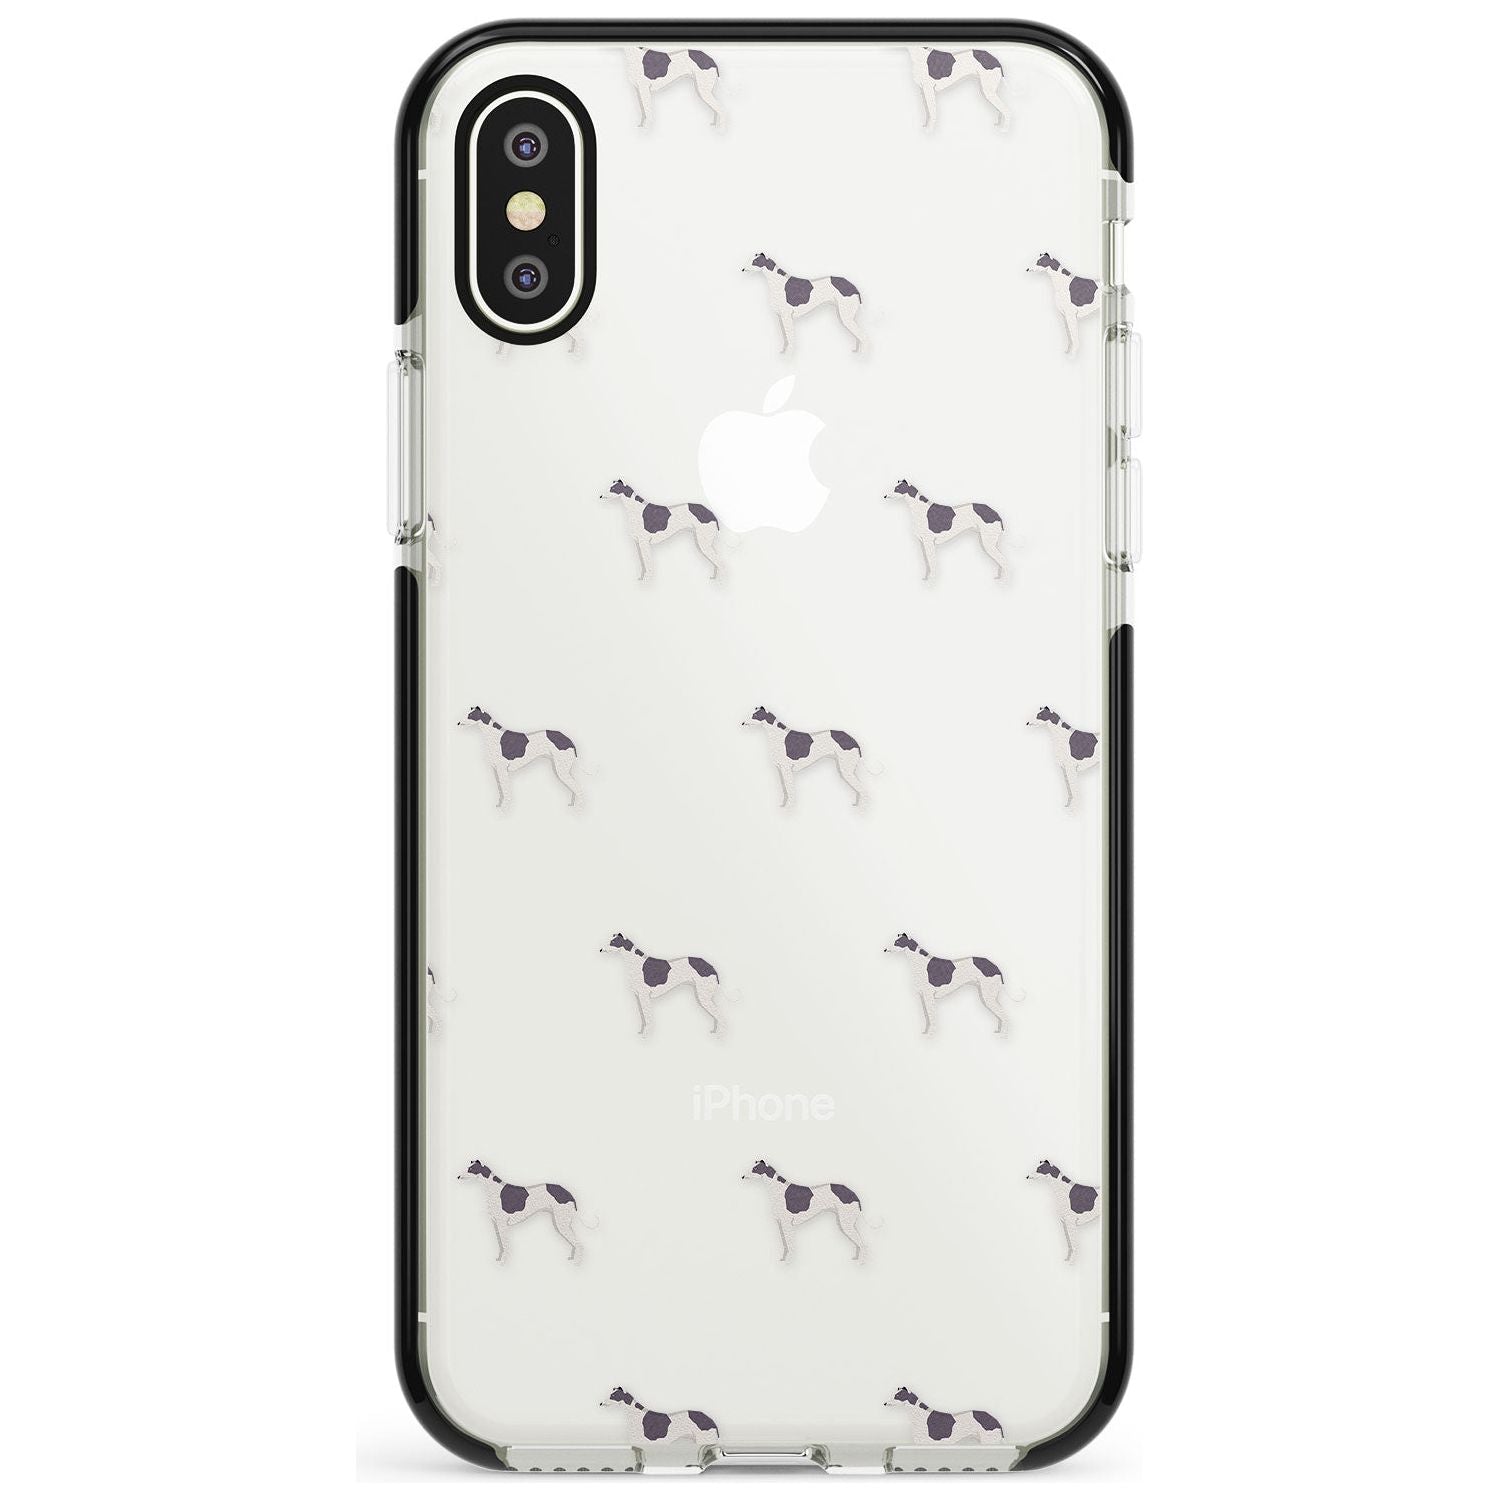 Greyhound Dog Pattern Clear Black Impact Phone Case for iPhone X XS Max XR